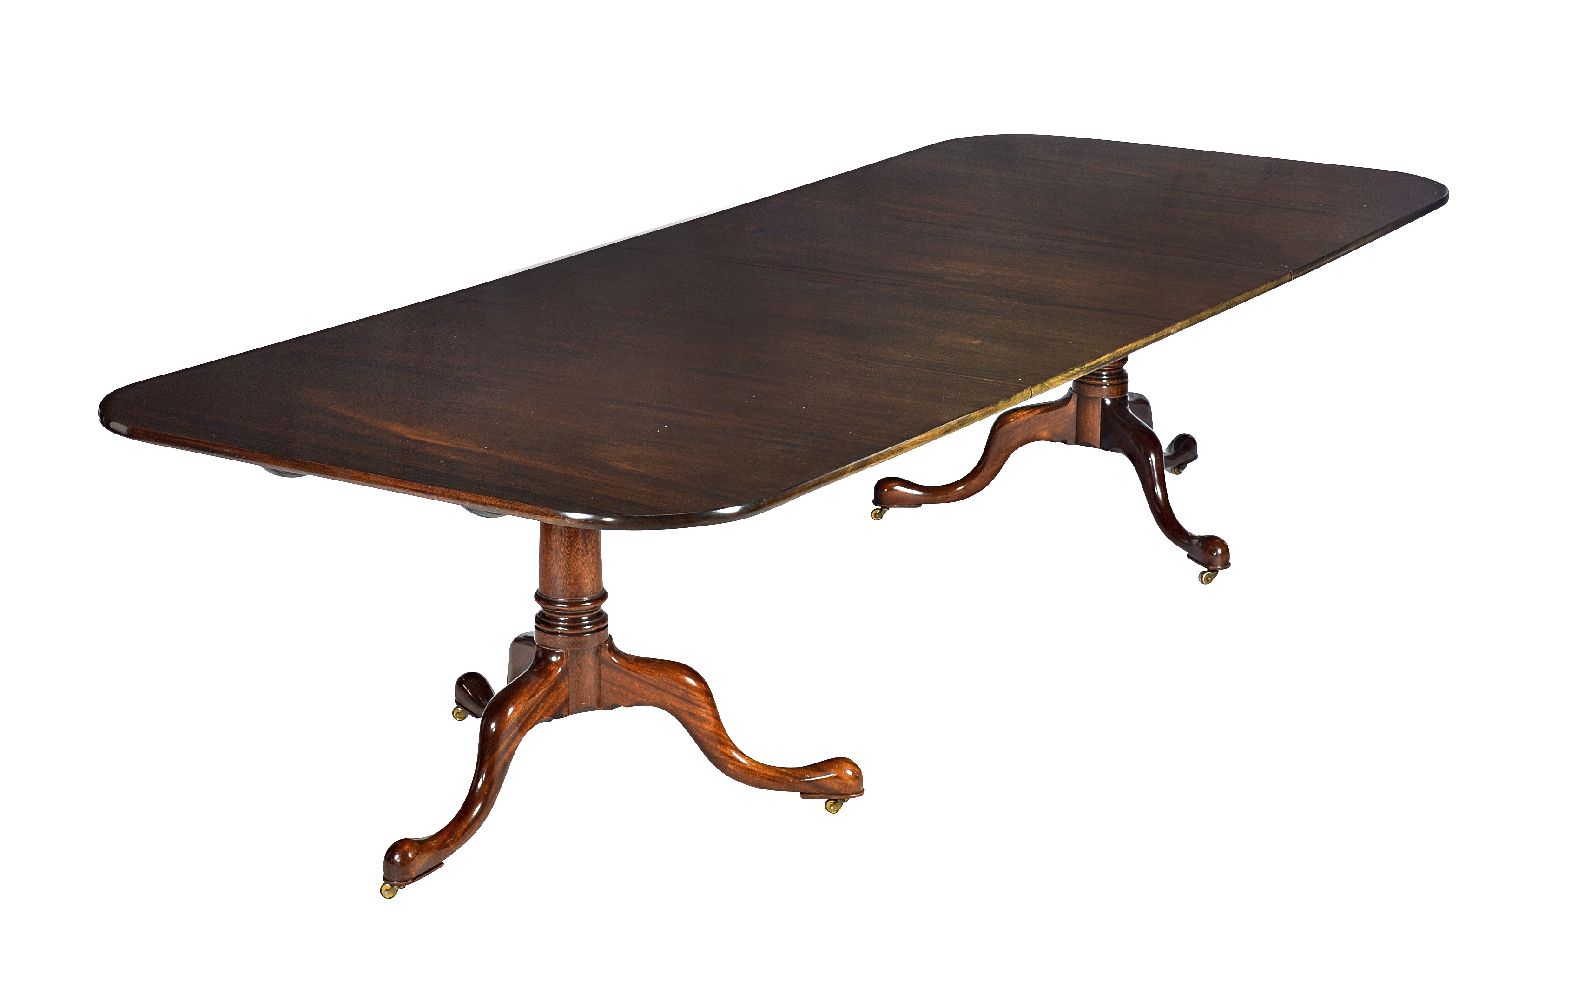 A mahogany dining table in George III style